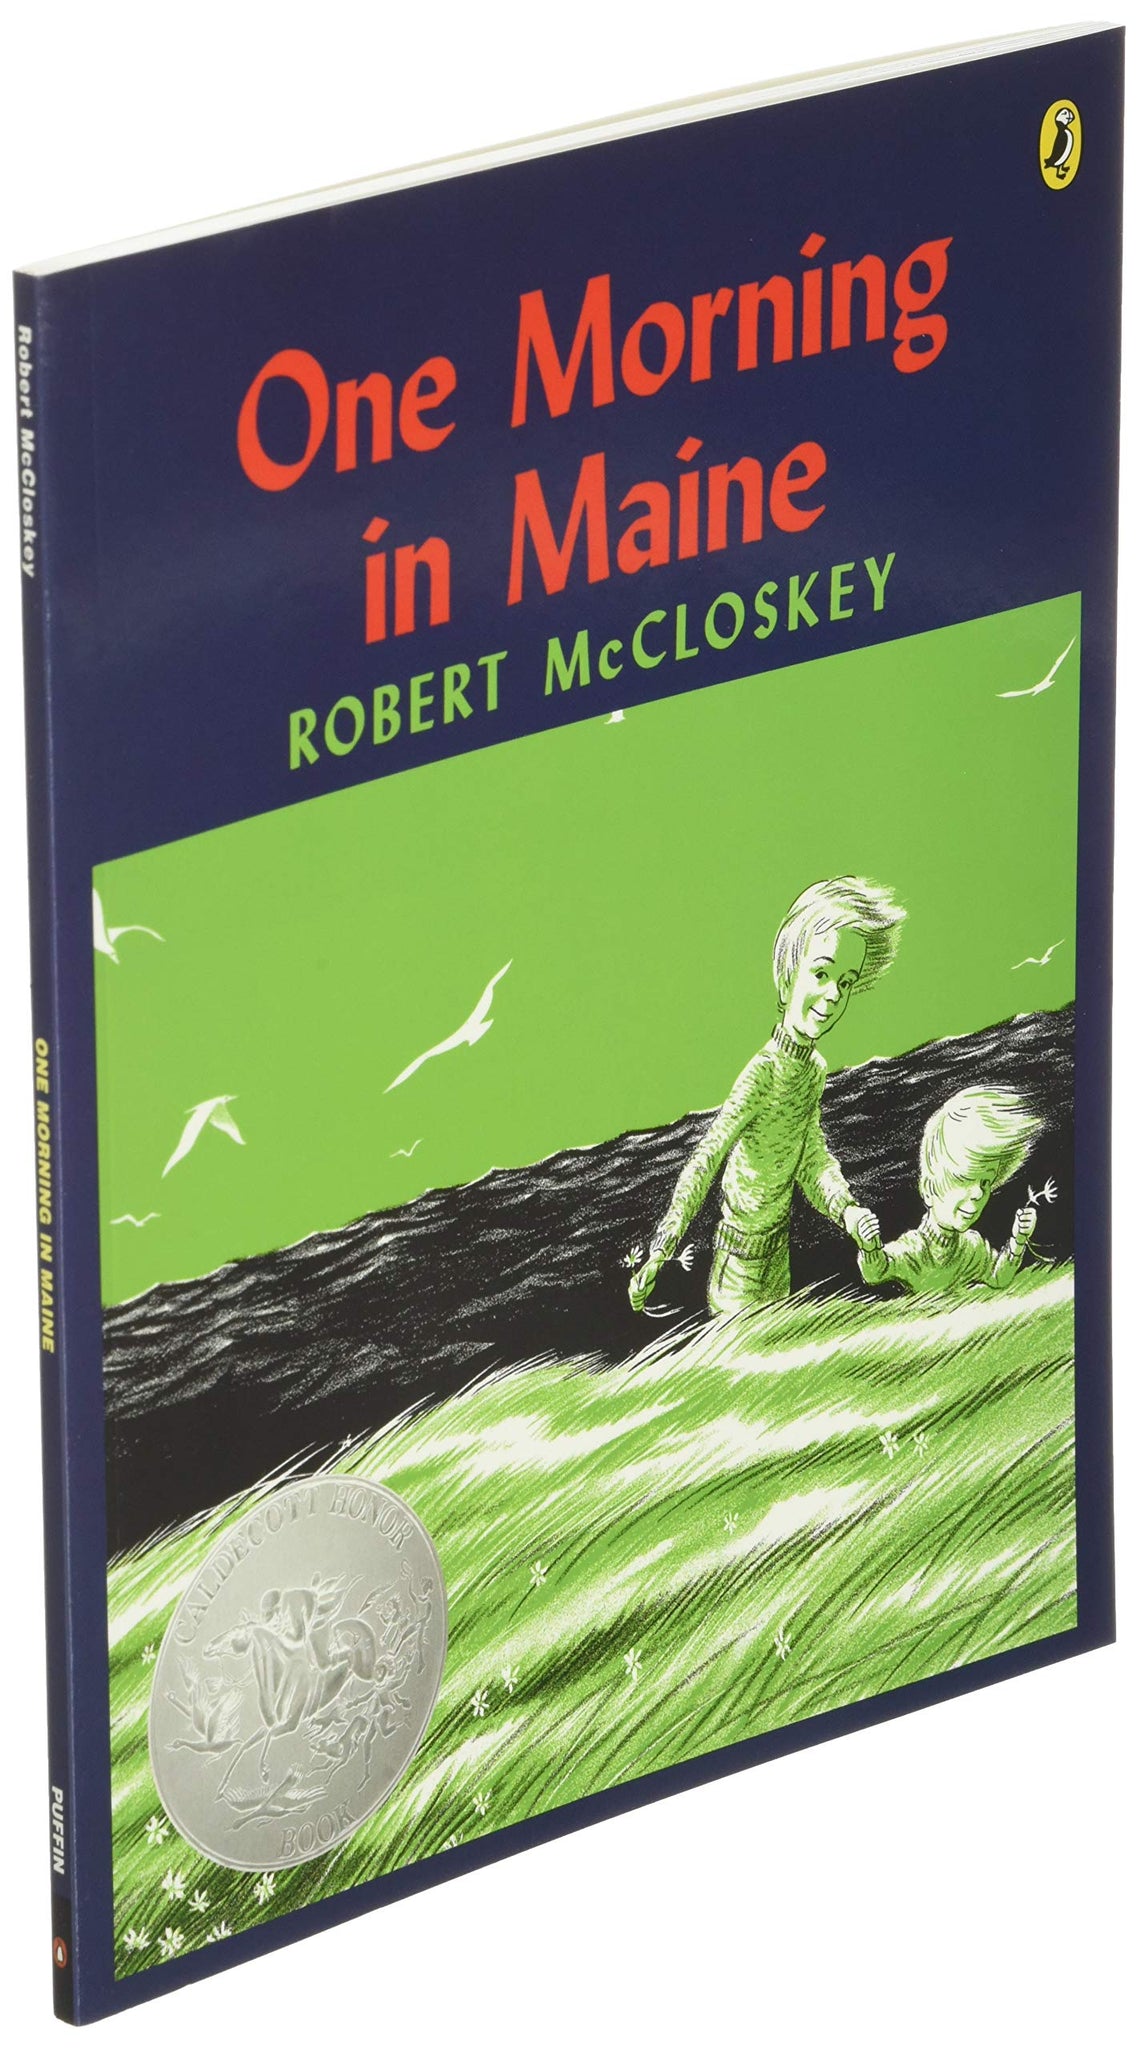 One Morning In Maine (Book)